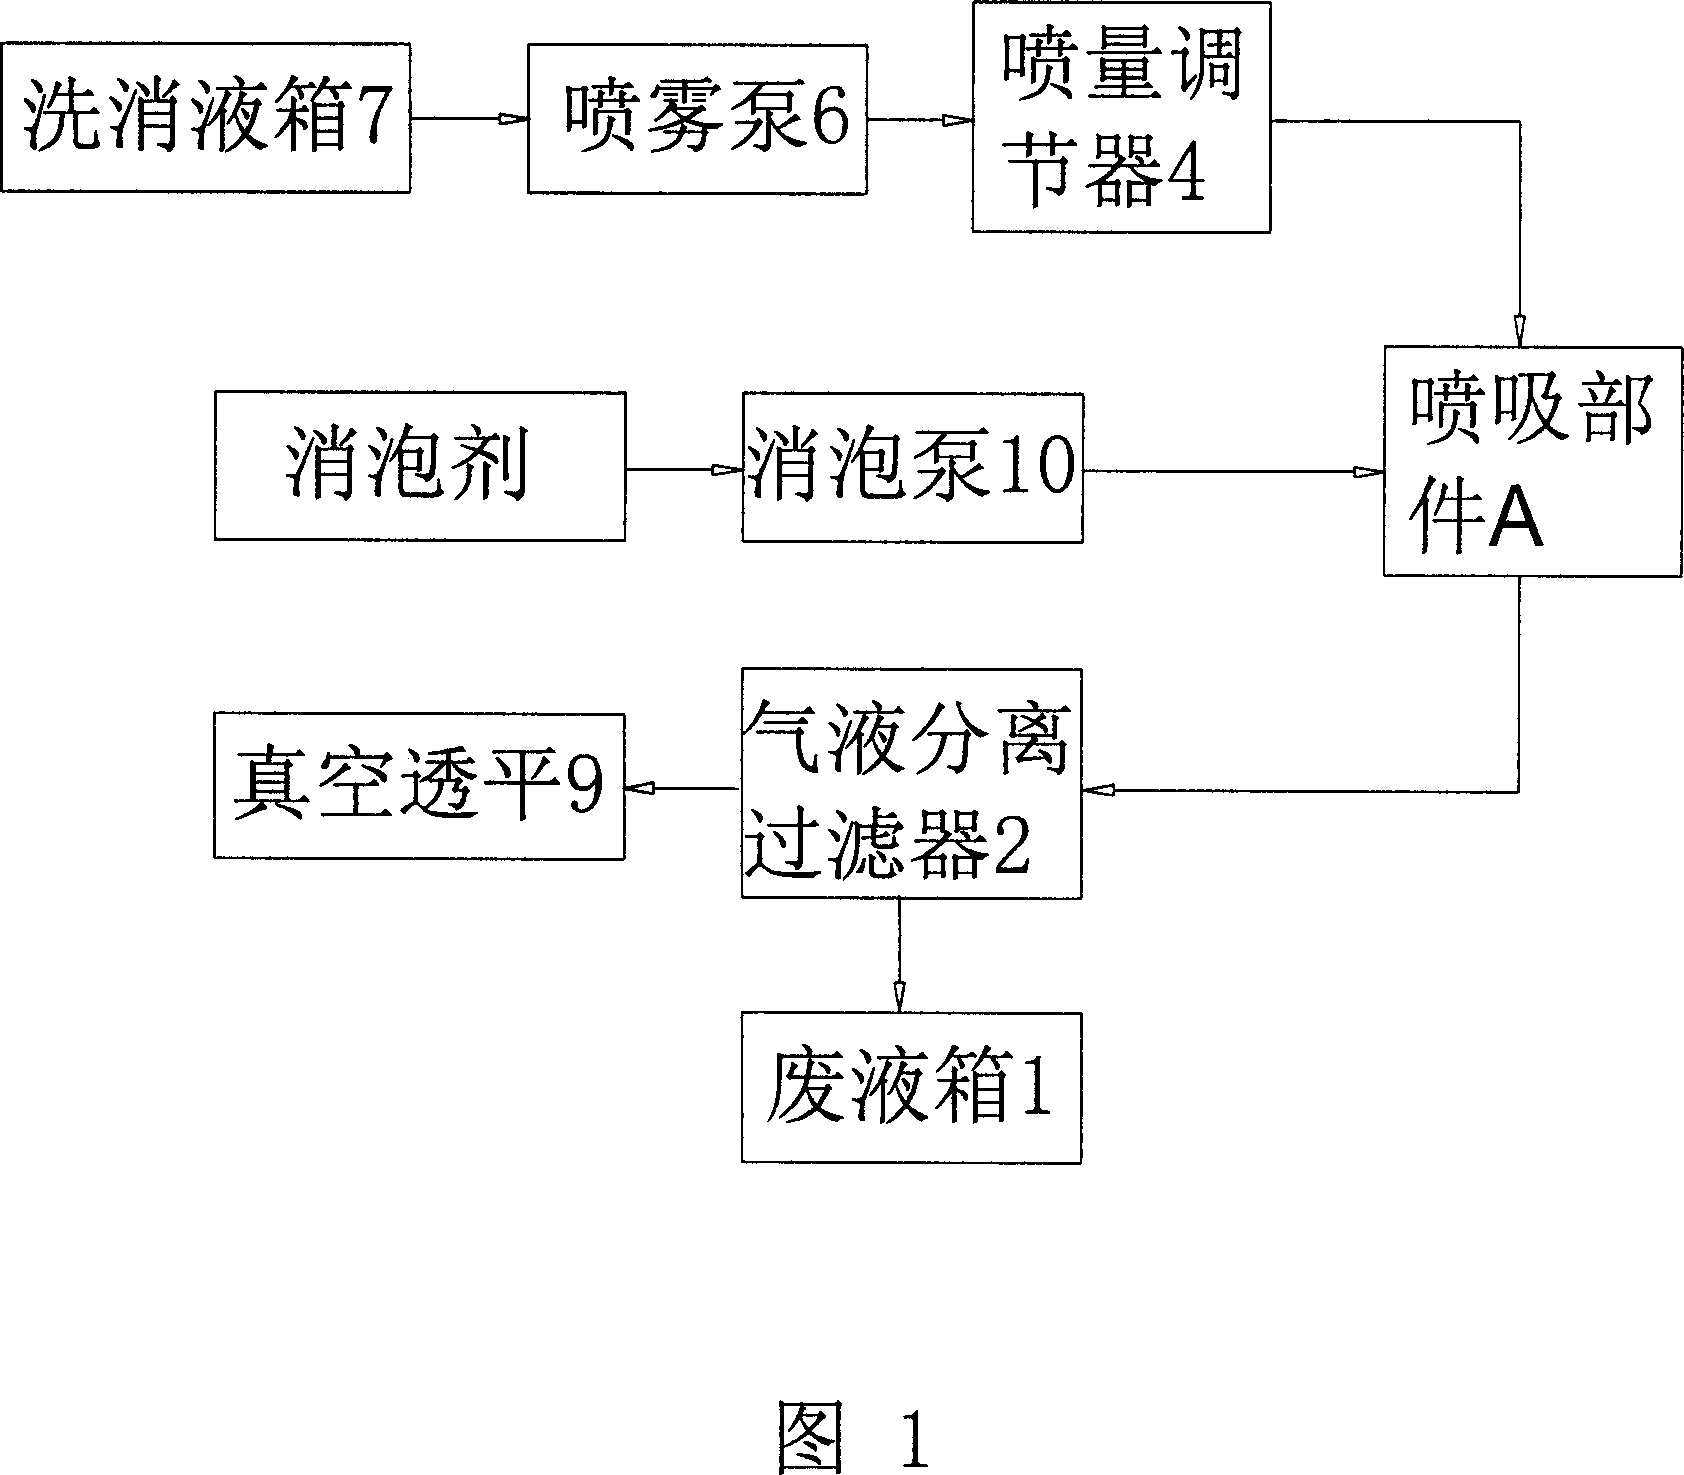 Nuclear and chemical injury washing and cleaning device